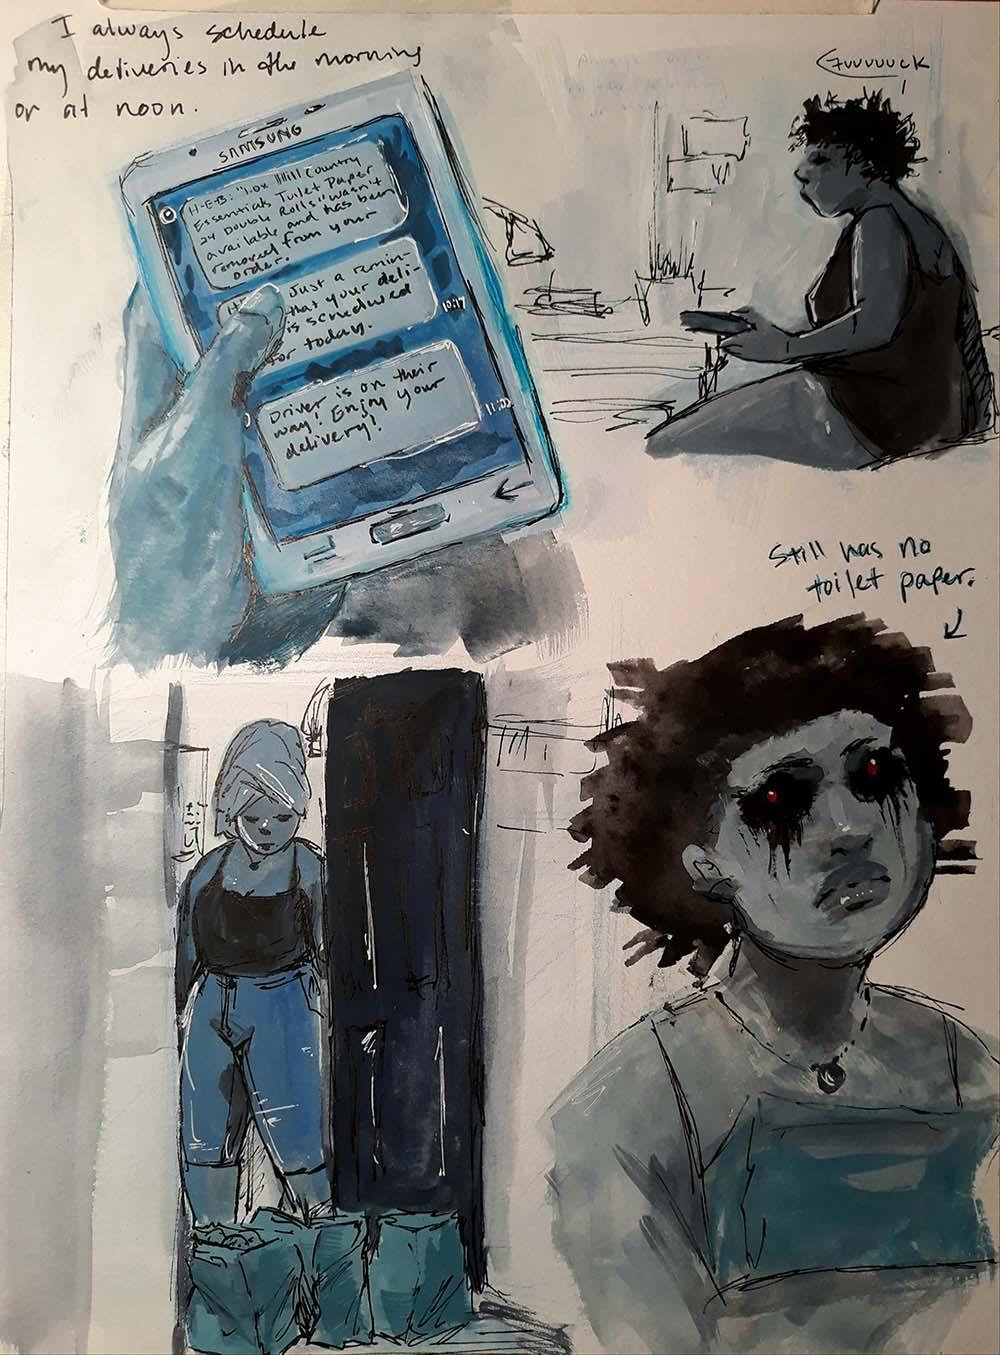 A series of annotated drawings by a student depicting how the pandemic makes her feel